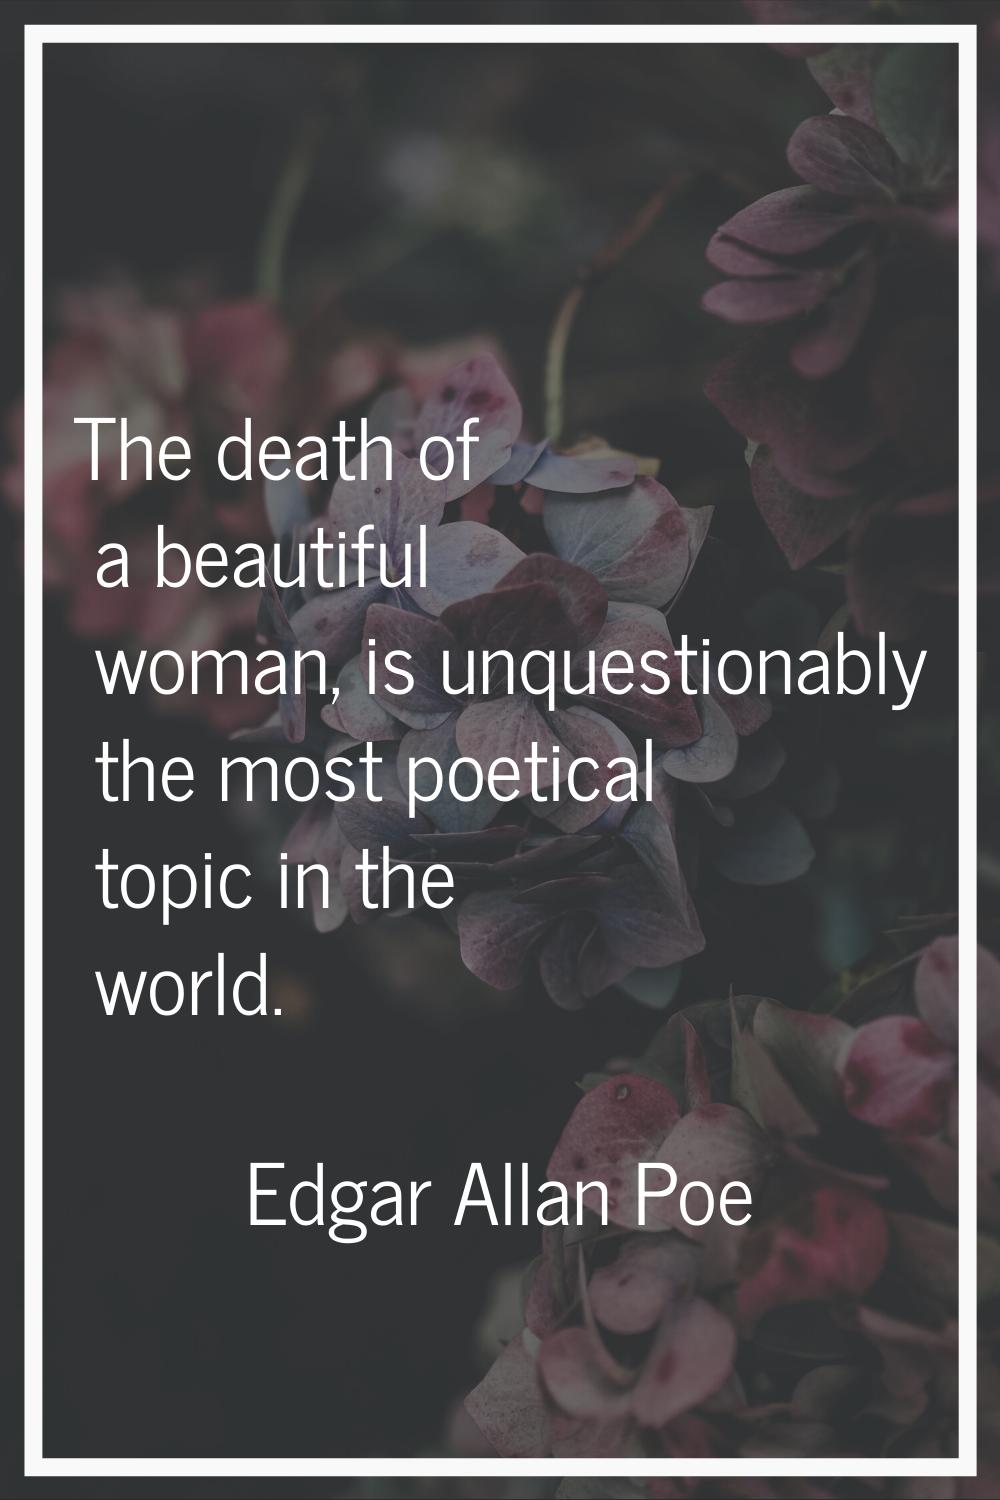 The death of a beautiful woman, is unquestionably the most poetical topic in the world.